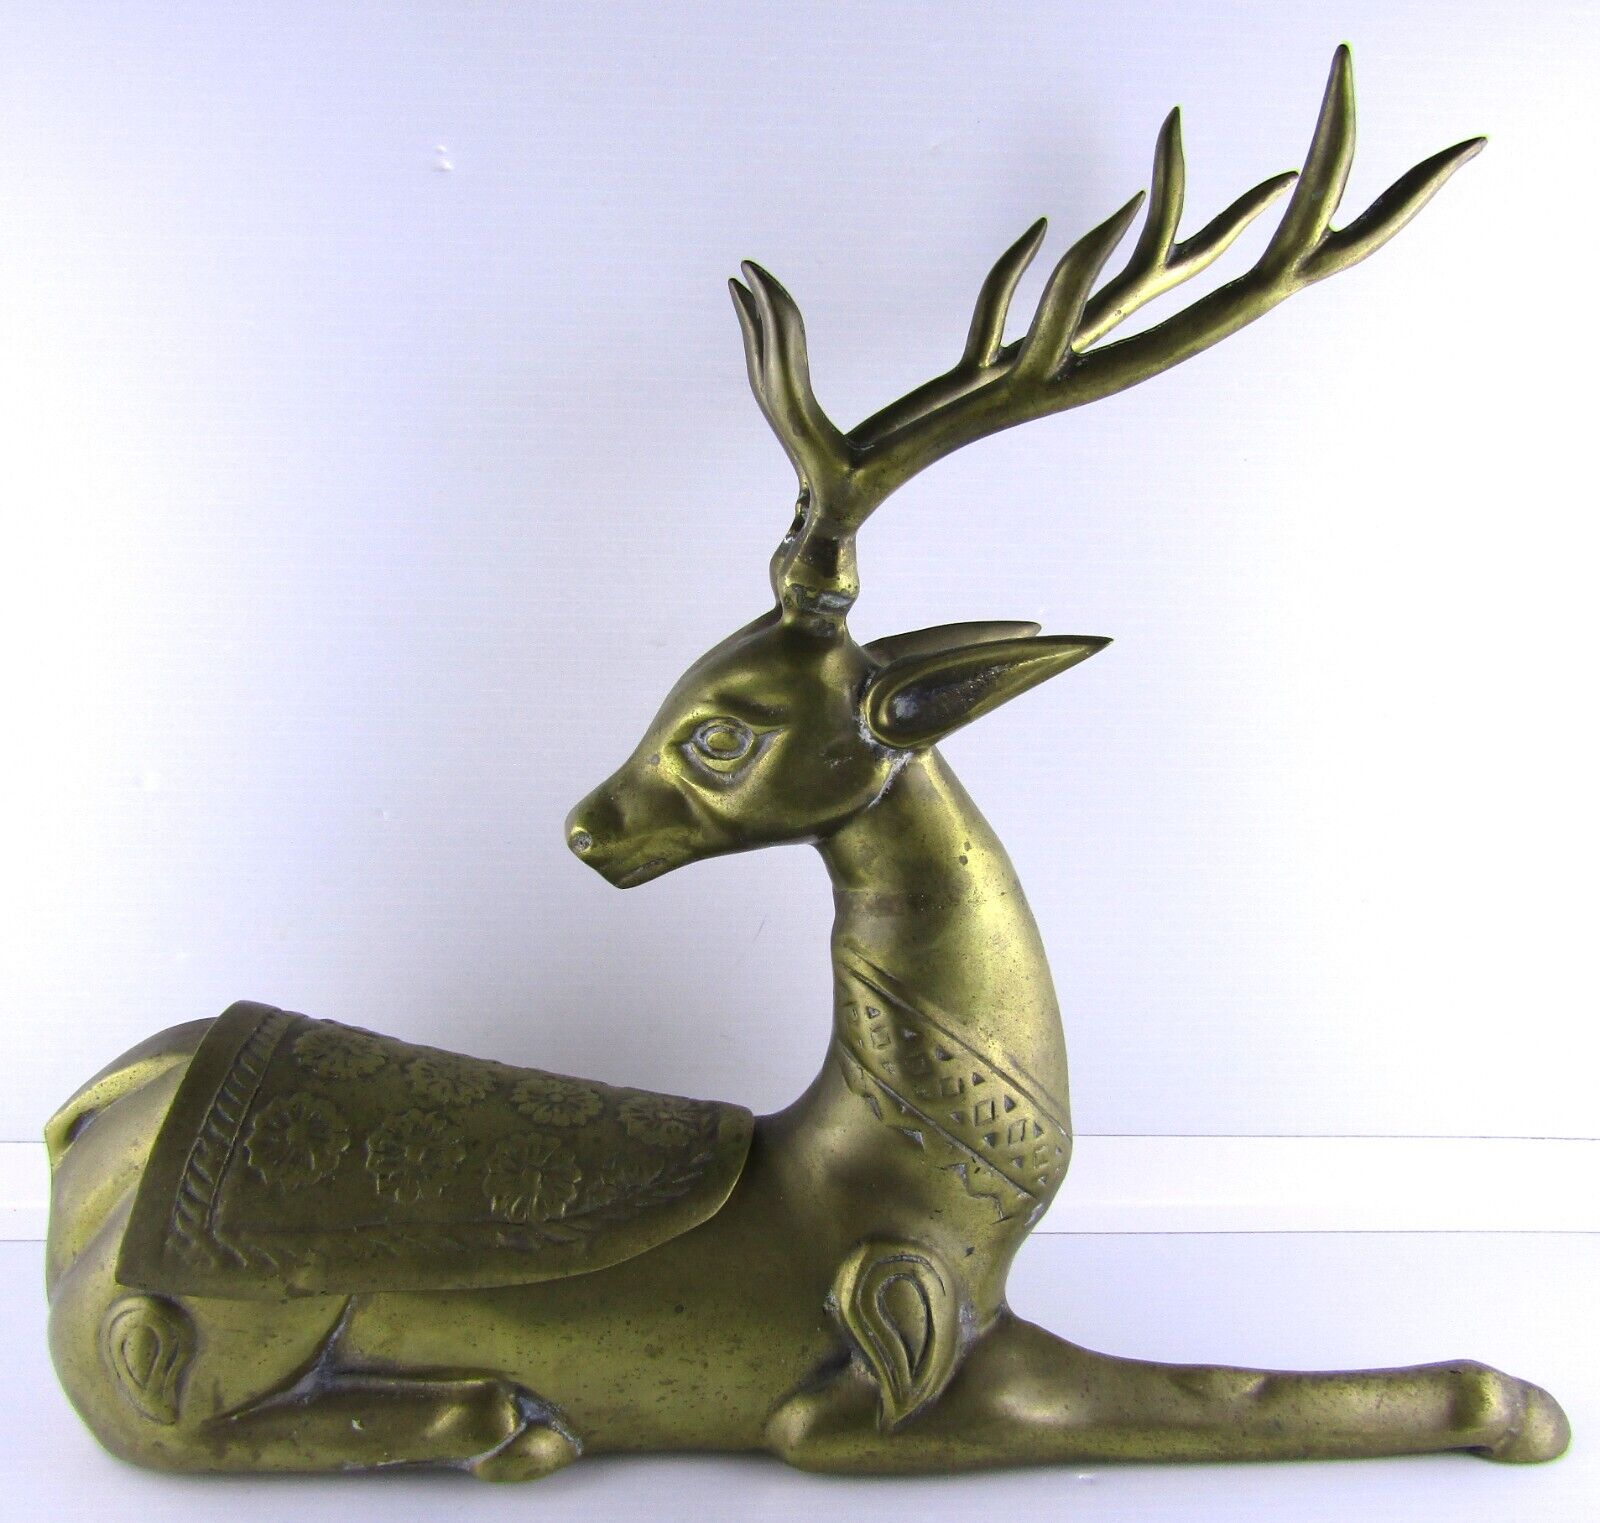 Large 15 Inch Tall Brass Deer Laying Down with Hidden Well 16 Inch Long 12.4 Lbs